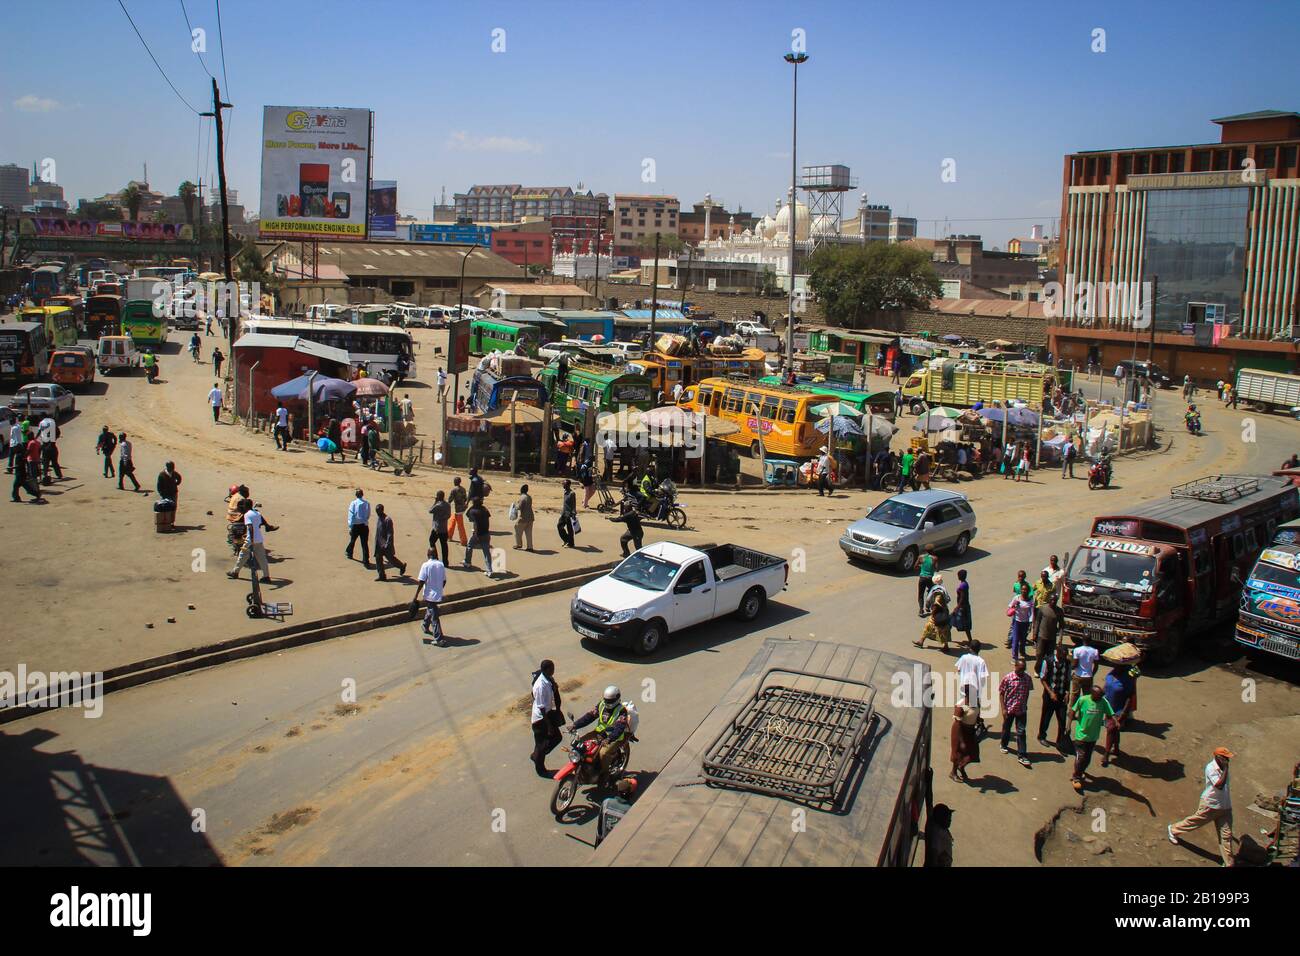 Nairobi, Kenya - January 17, 2015: A busy street full of public transport, buses, cars, motorcycles and pedestrians. View from above Stock Photo